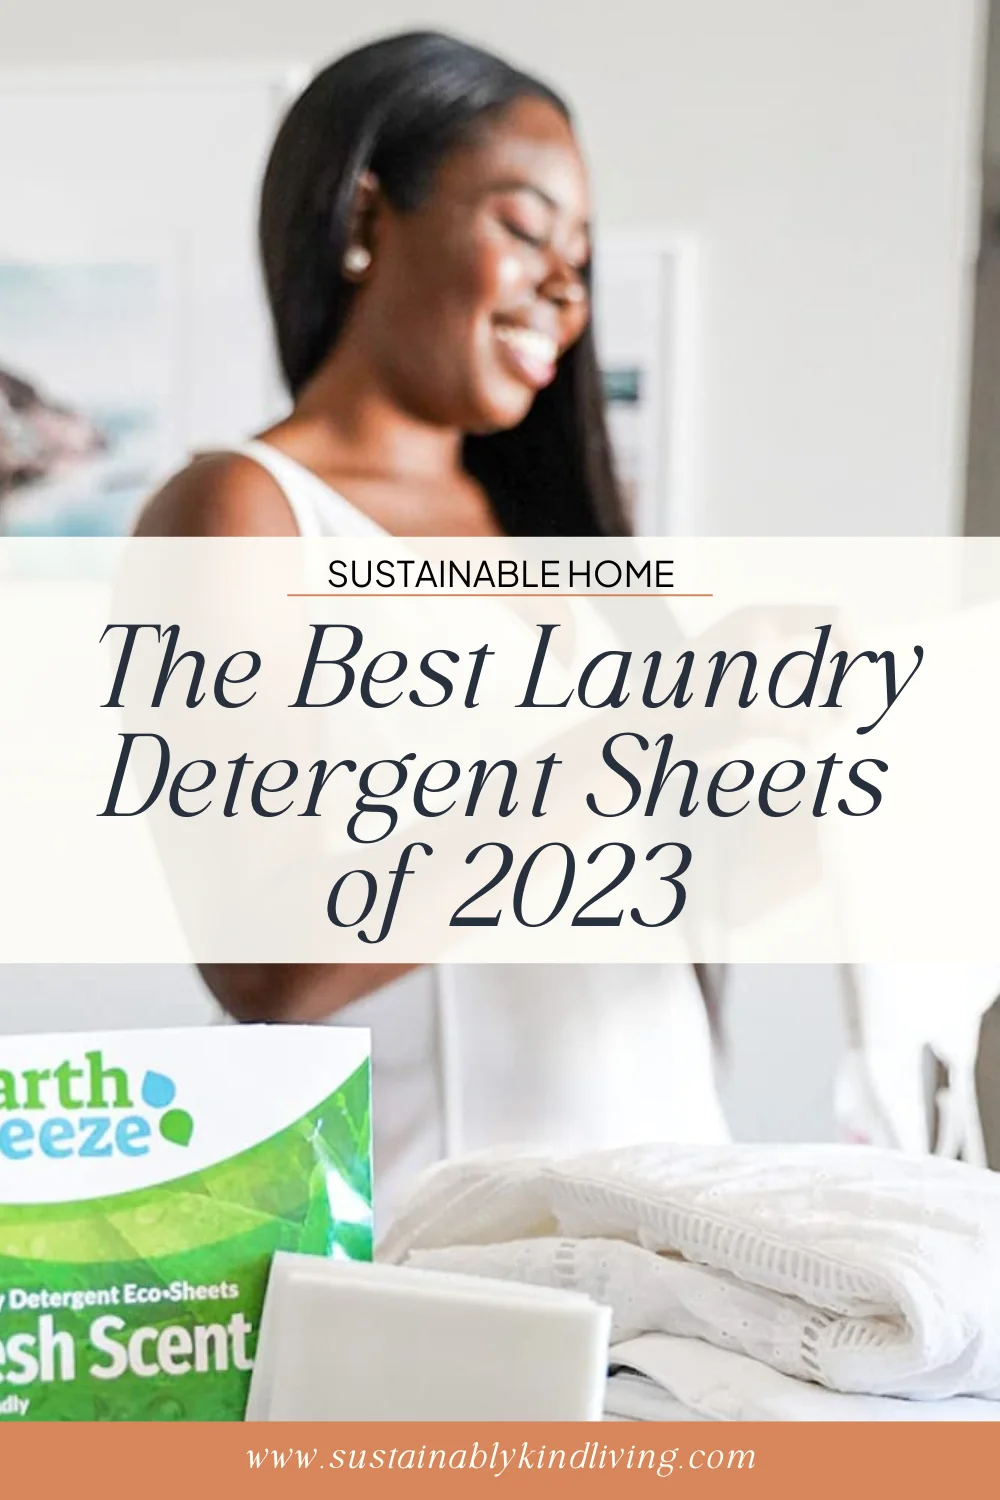 are laundry detergent sheets good?